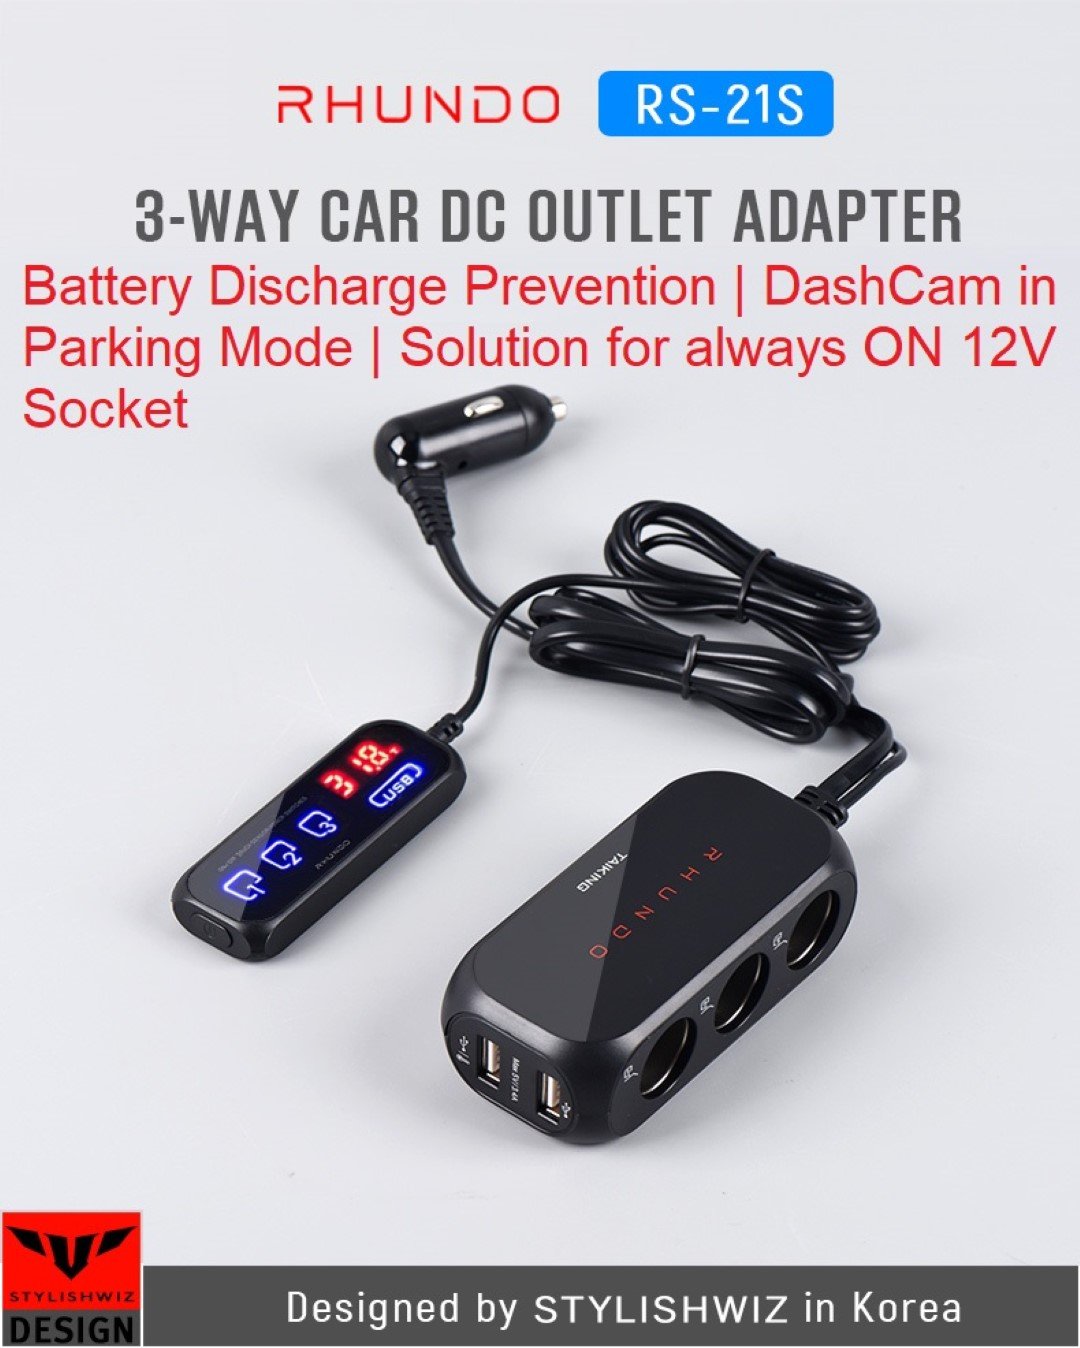 https://aatusa.in/wp-content/uploads/2023/05/4-Rhundo-Car-Charger-Auto-Cut-off-Turn-off-Charger-for-DashCam-Parking-Mode-Large-1.jpg